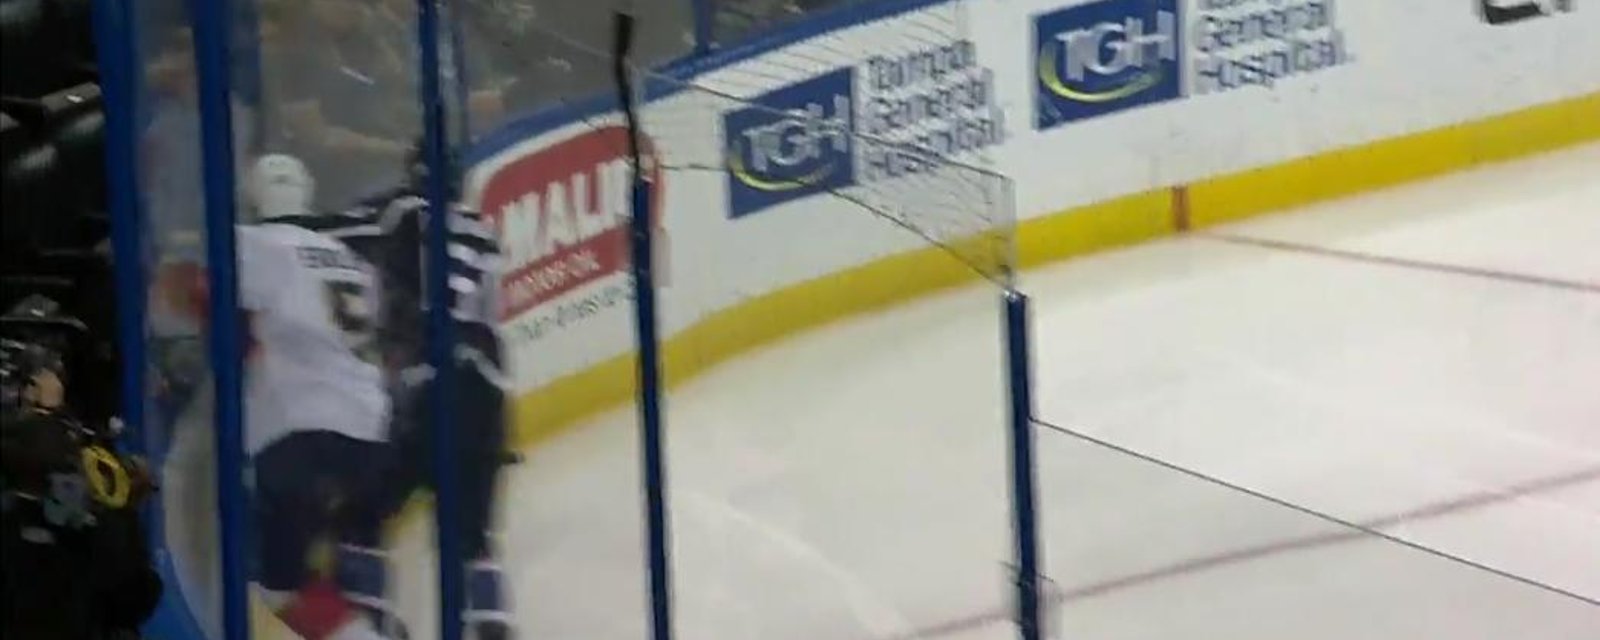 Another star defenseman down after hit to the head tonight. 